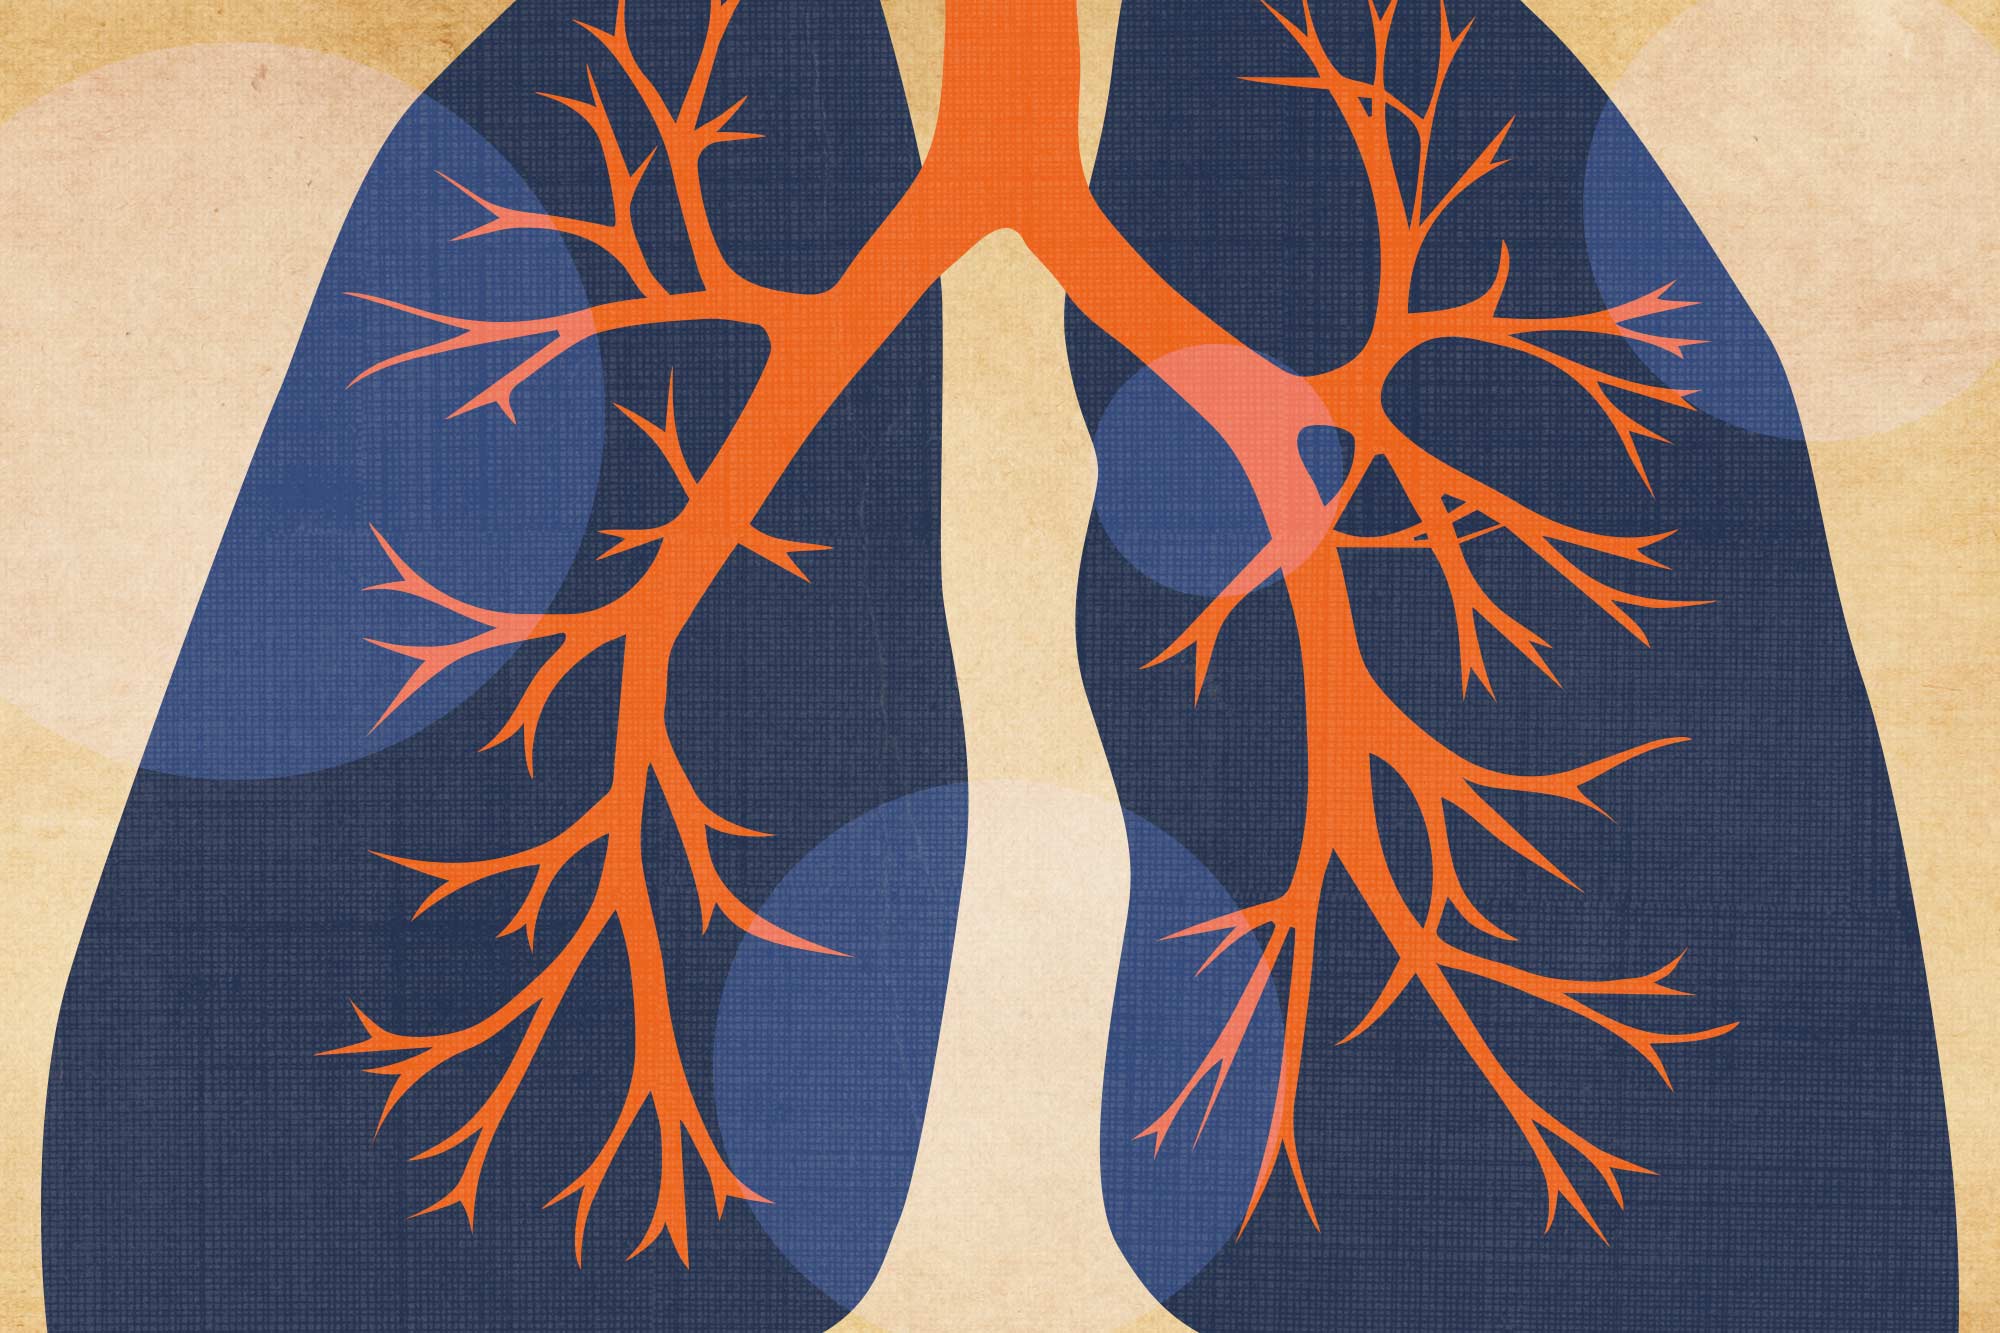 Abstract illustration of lungs and semi-transparent circles